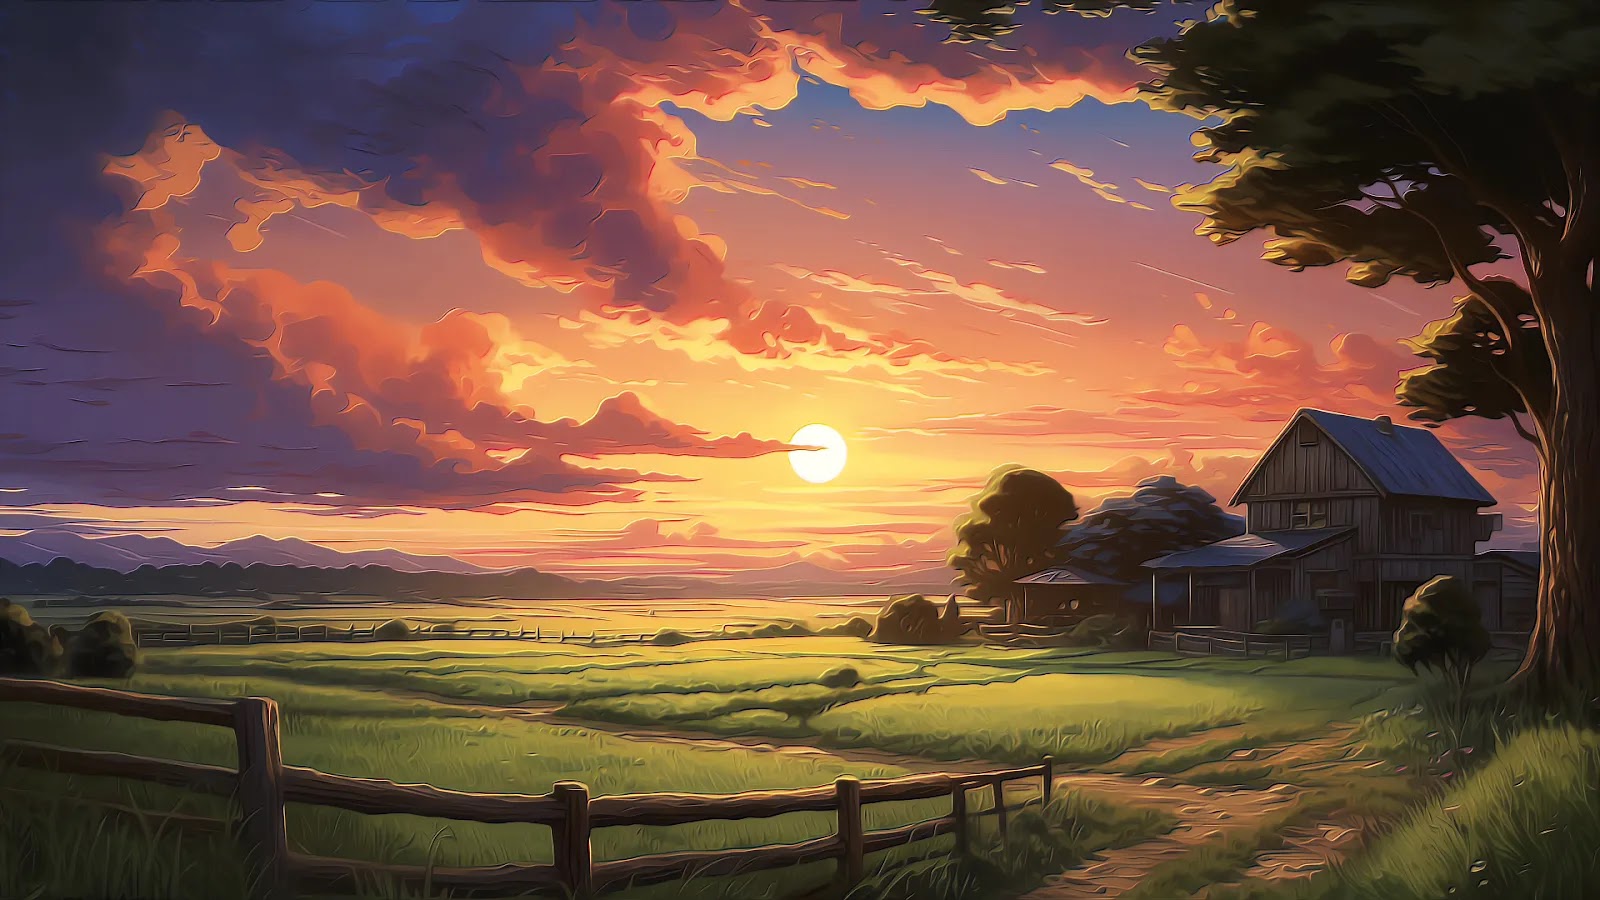 The image shows a painting of a sunset over a farm. A field with a wooden fence stretches across the foreground, leading to a house in the background. The sky is ablaze with vibrant colors, ranging from fiery orange to deep purple.